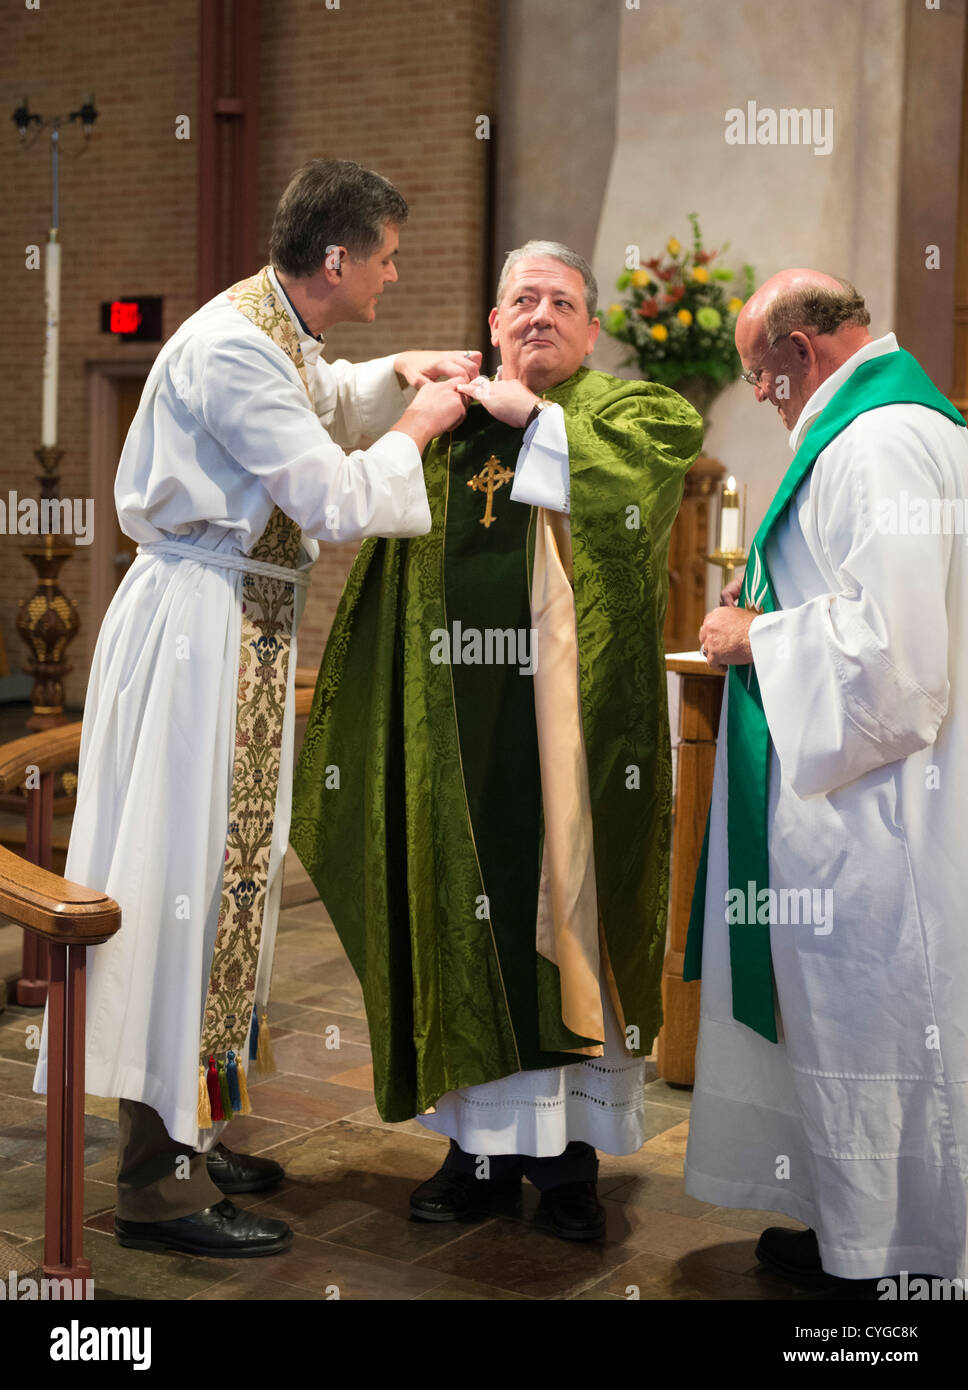 Pastors in albs and stoles beside Rev. Peder Sandager during his installation as senior pastor at St. Martin's Lutheran Church Stock Photo